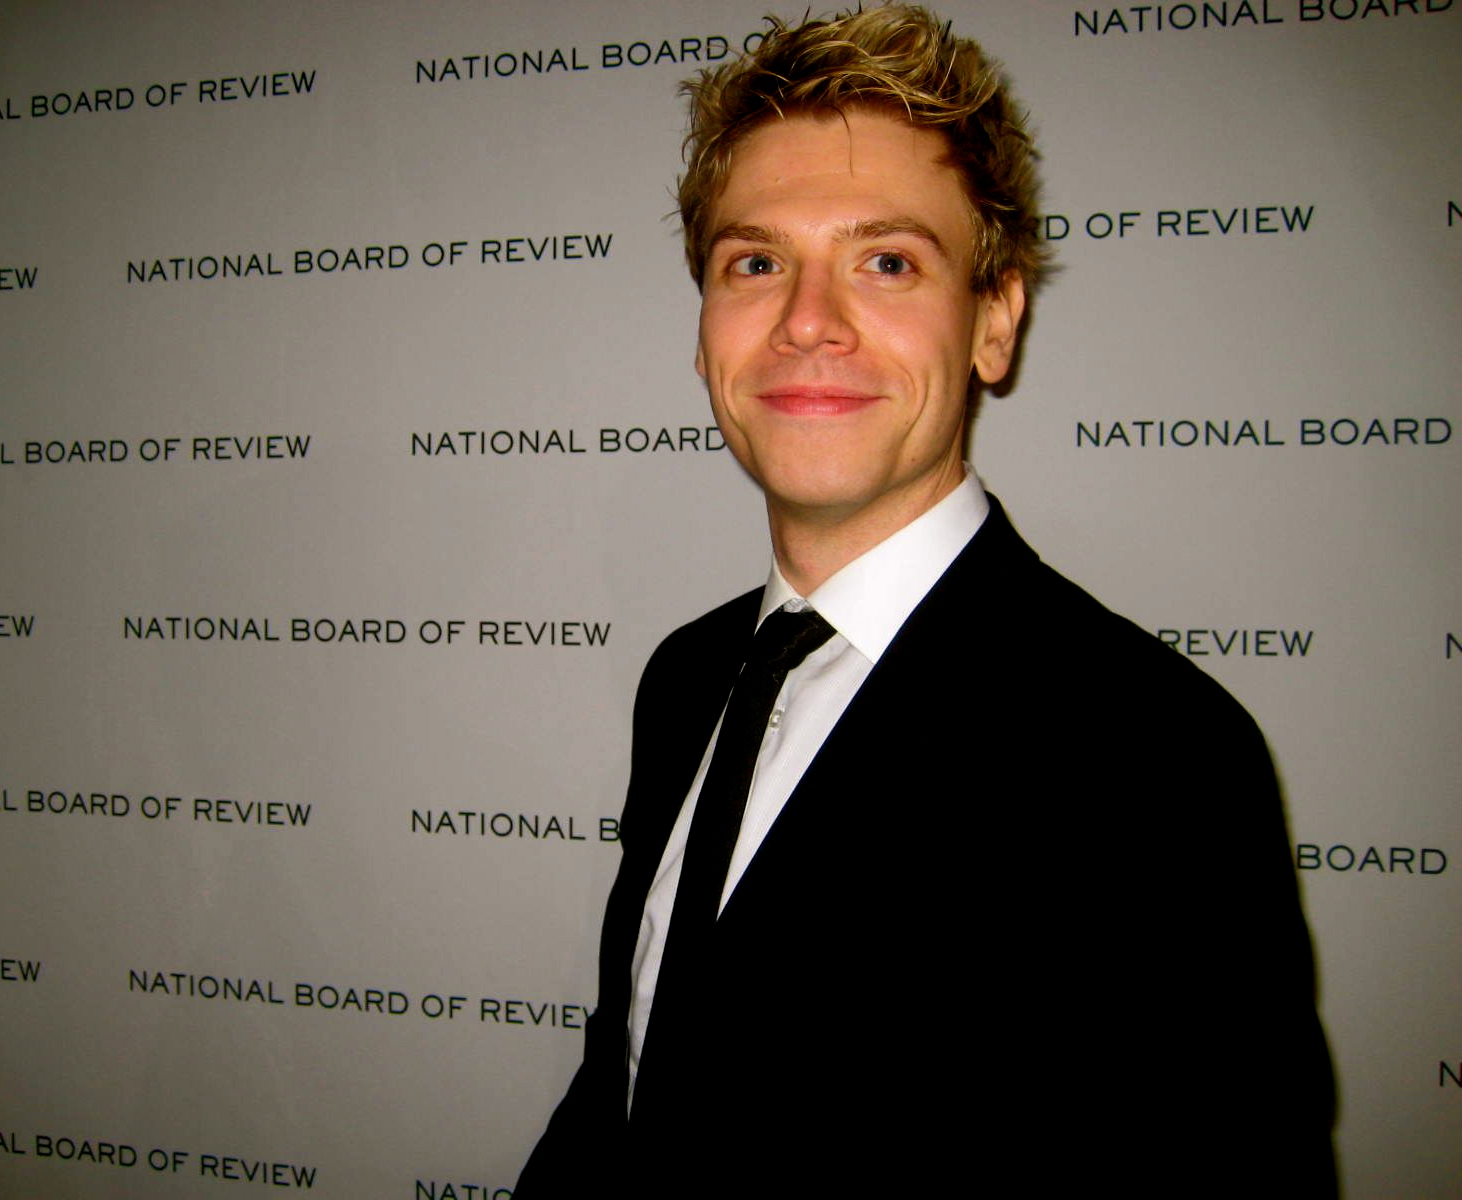 Stefano Da Fre walking the red carpet at the National Board of Review Dinner in New York City